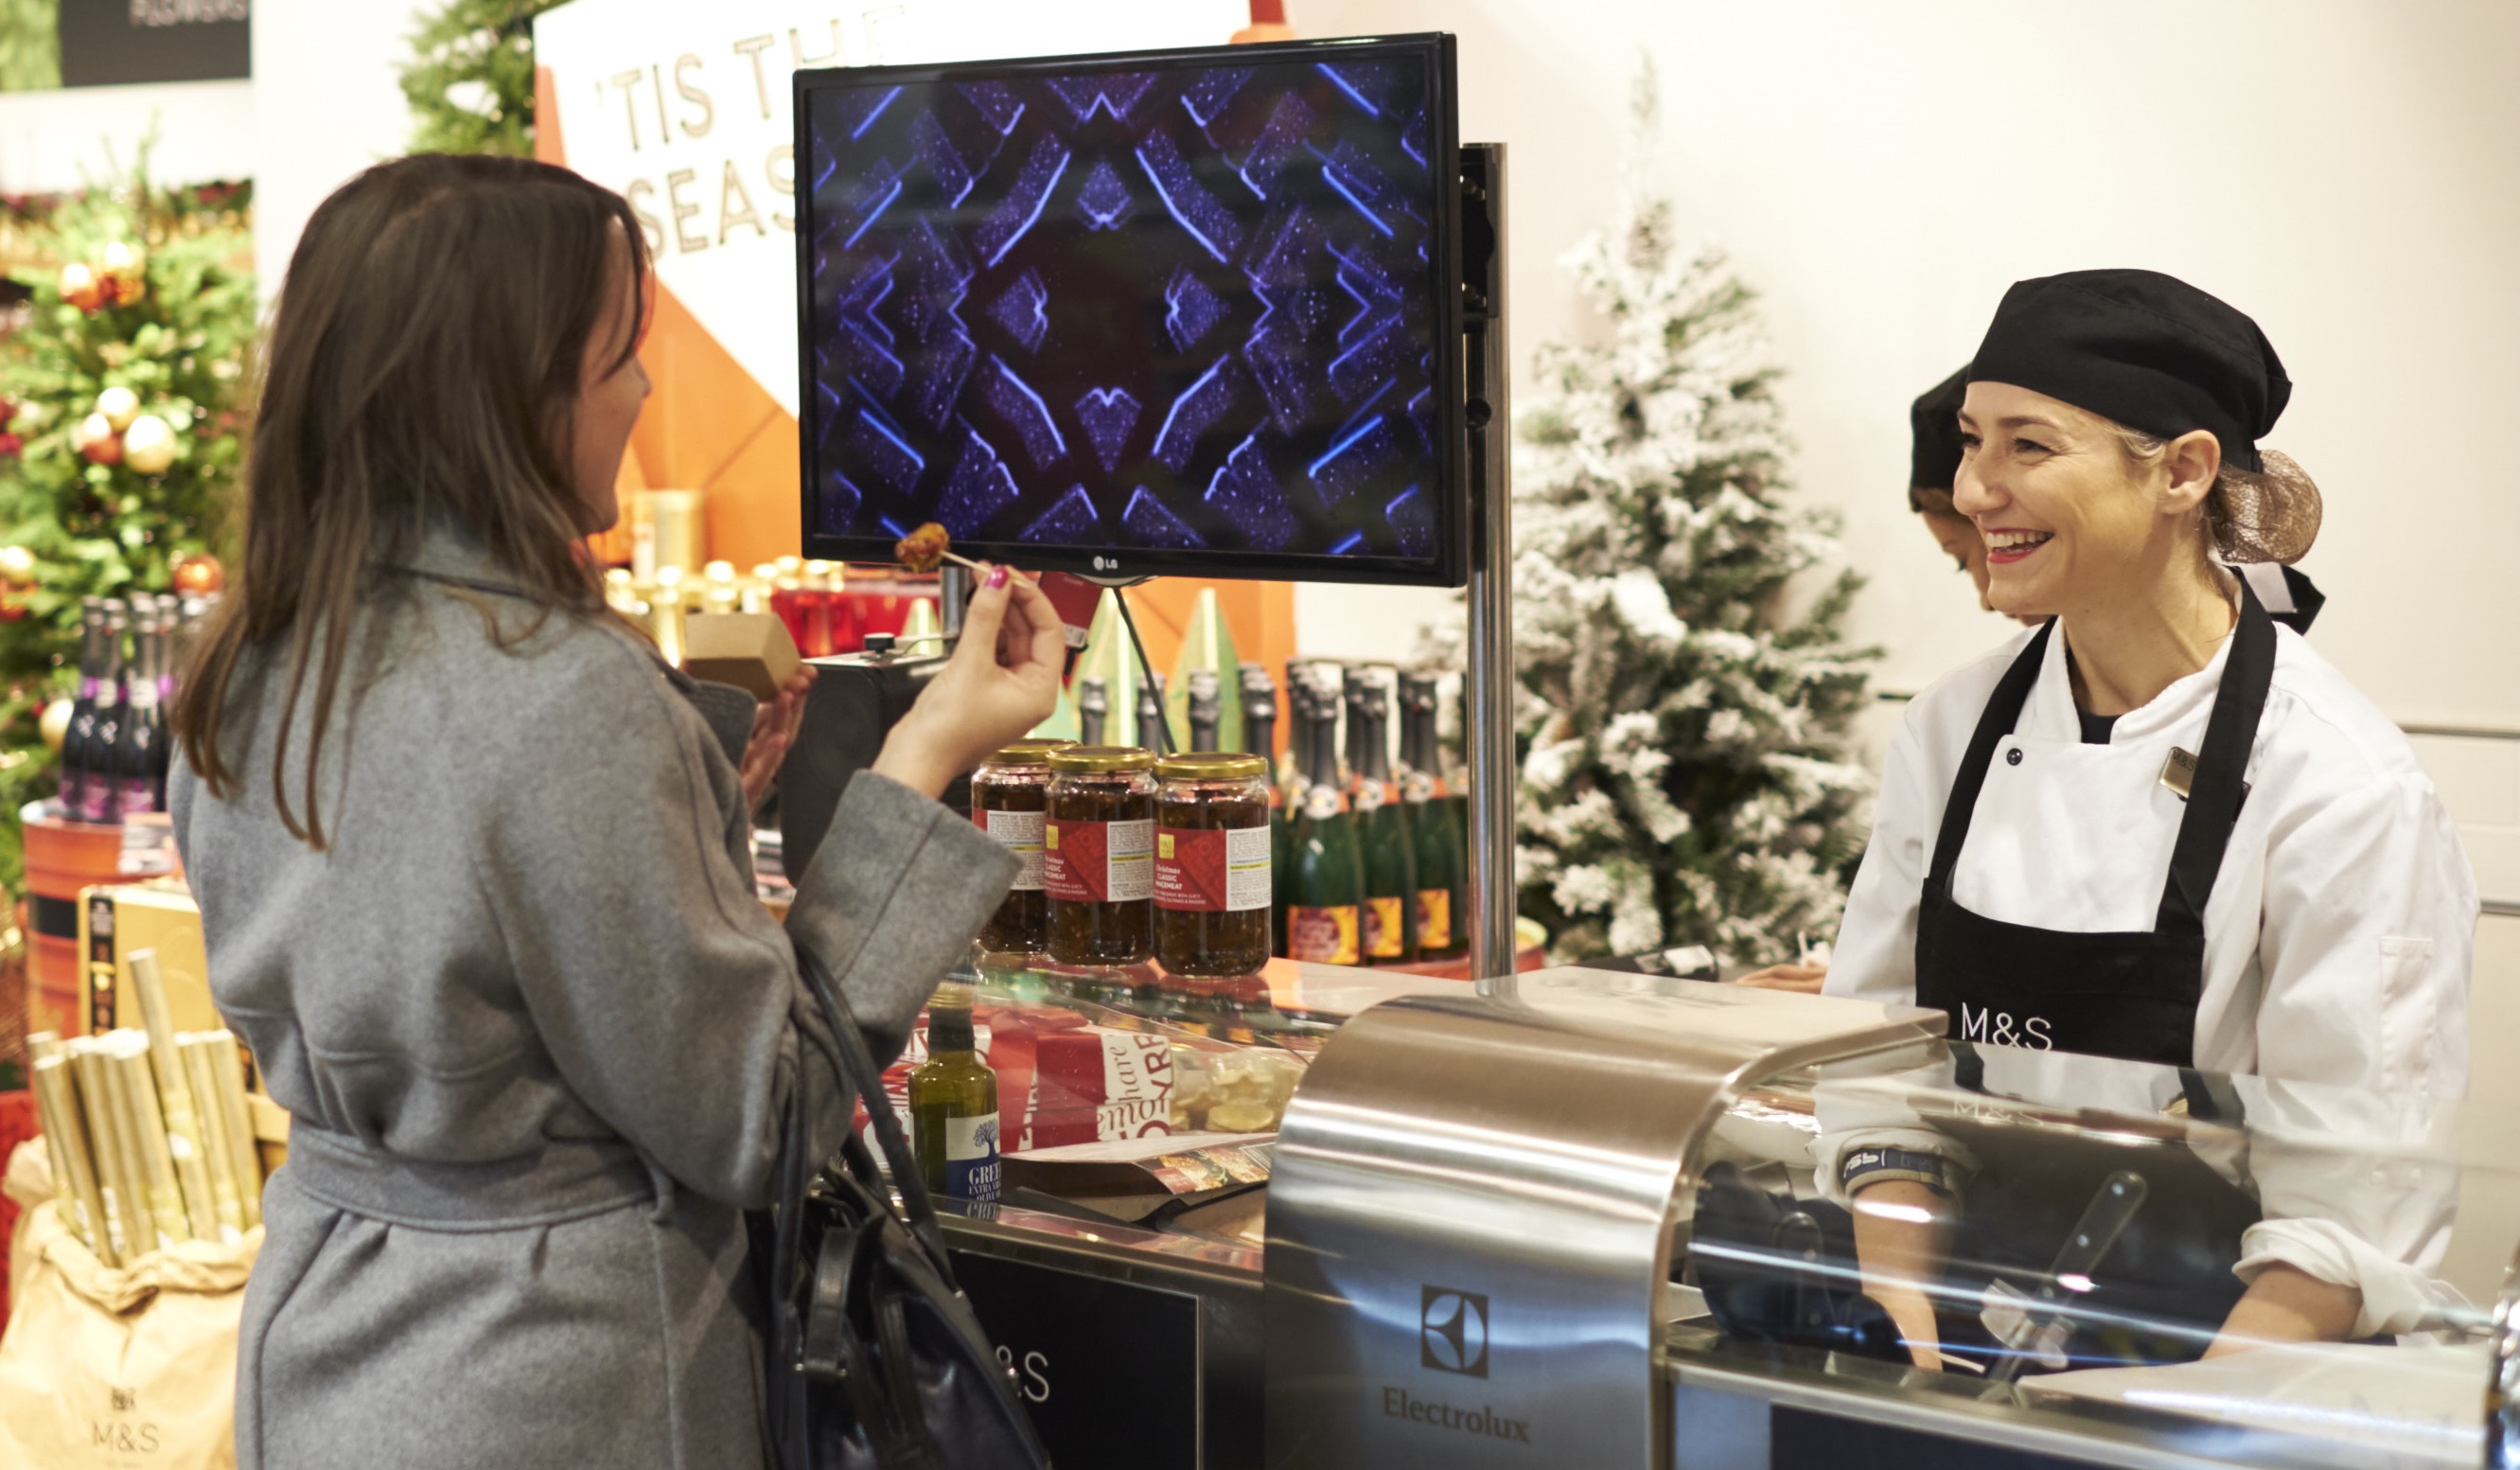 M&S hosts a three day Taste of Christmas event, Dec. 1-3, 2016 